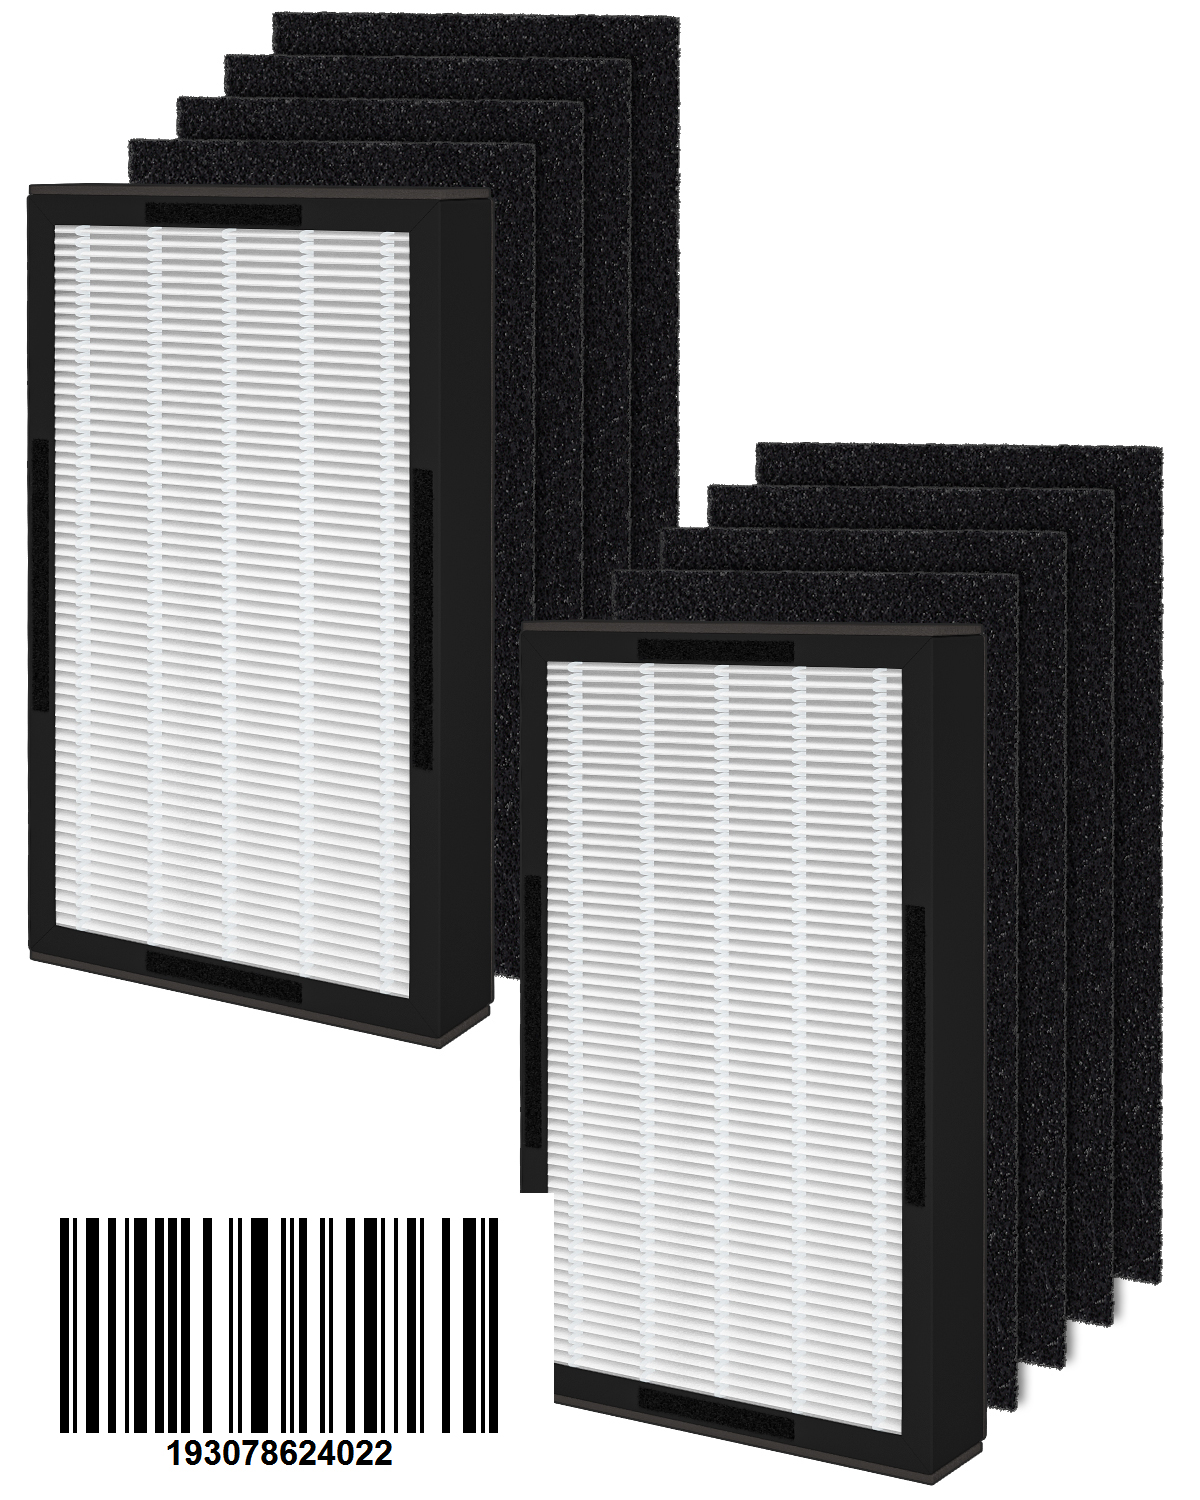  Fil-fresh 2-Pack FLT4100 Filter Value Combo, True HEPA Filter E Compatible with Germ Guardian AC4100 Air Purifier